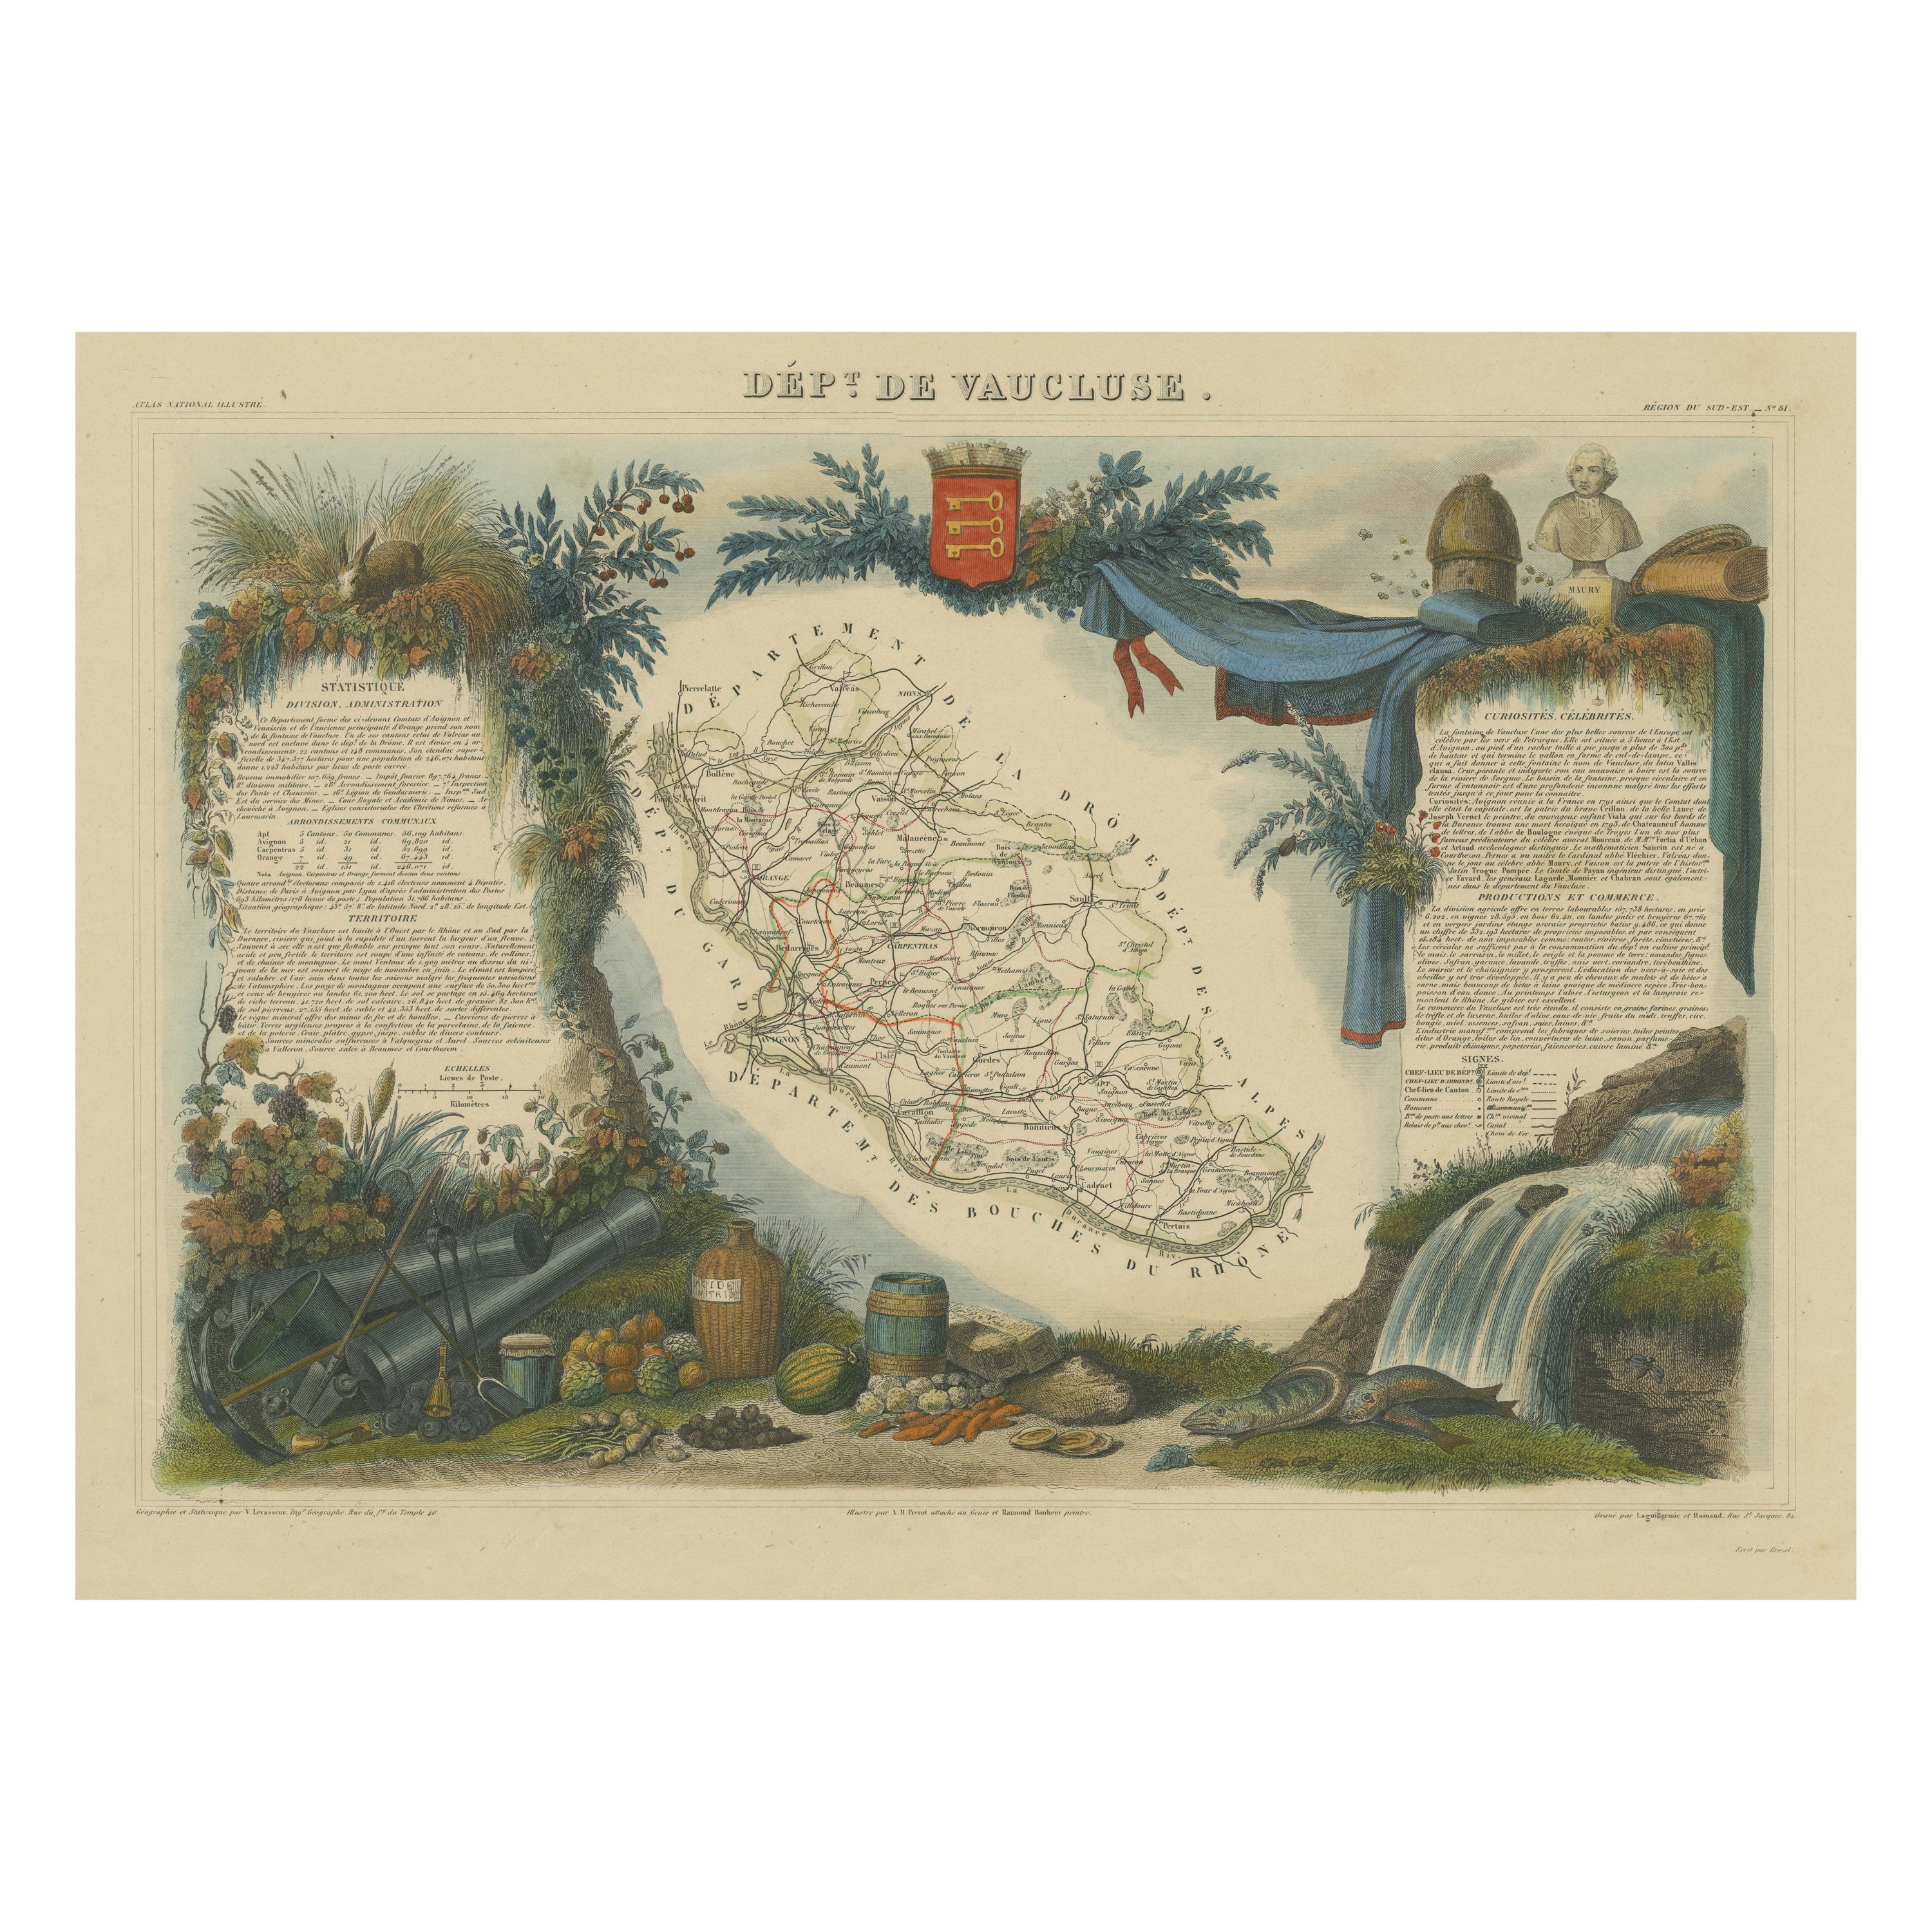 Hand Colored Antique Map of the Department of Vaucluse, France